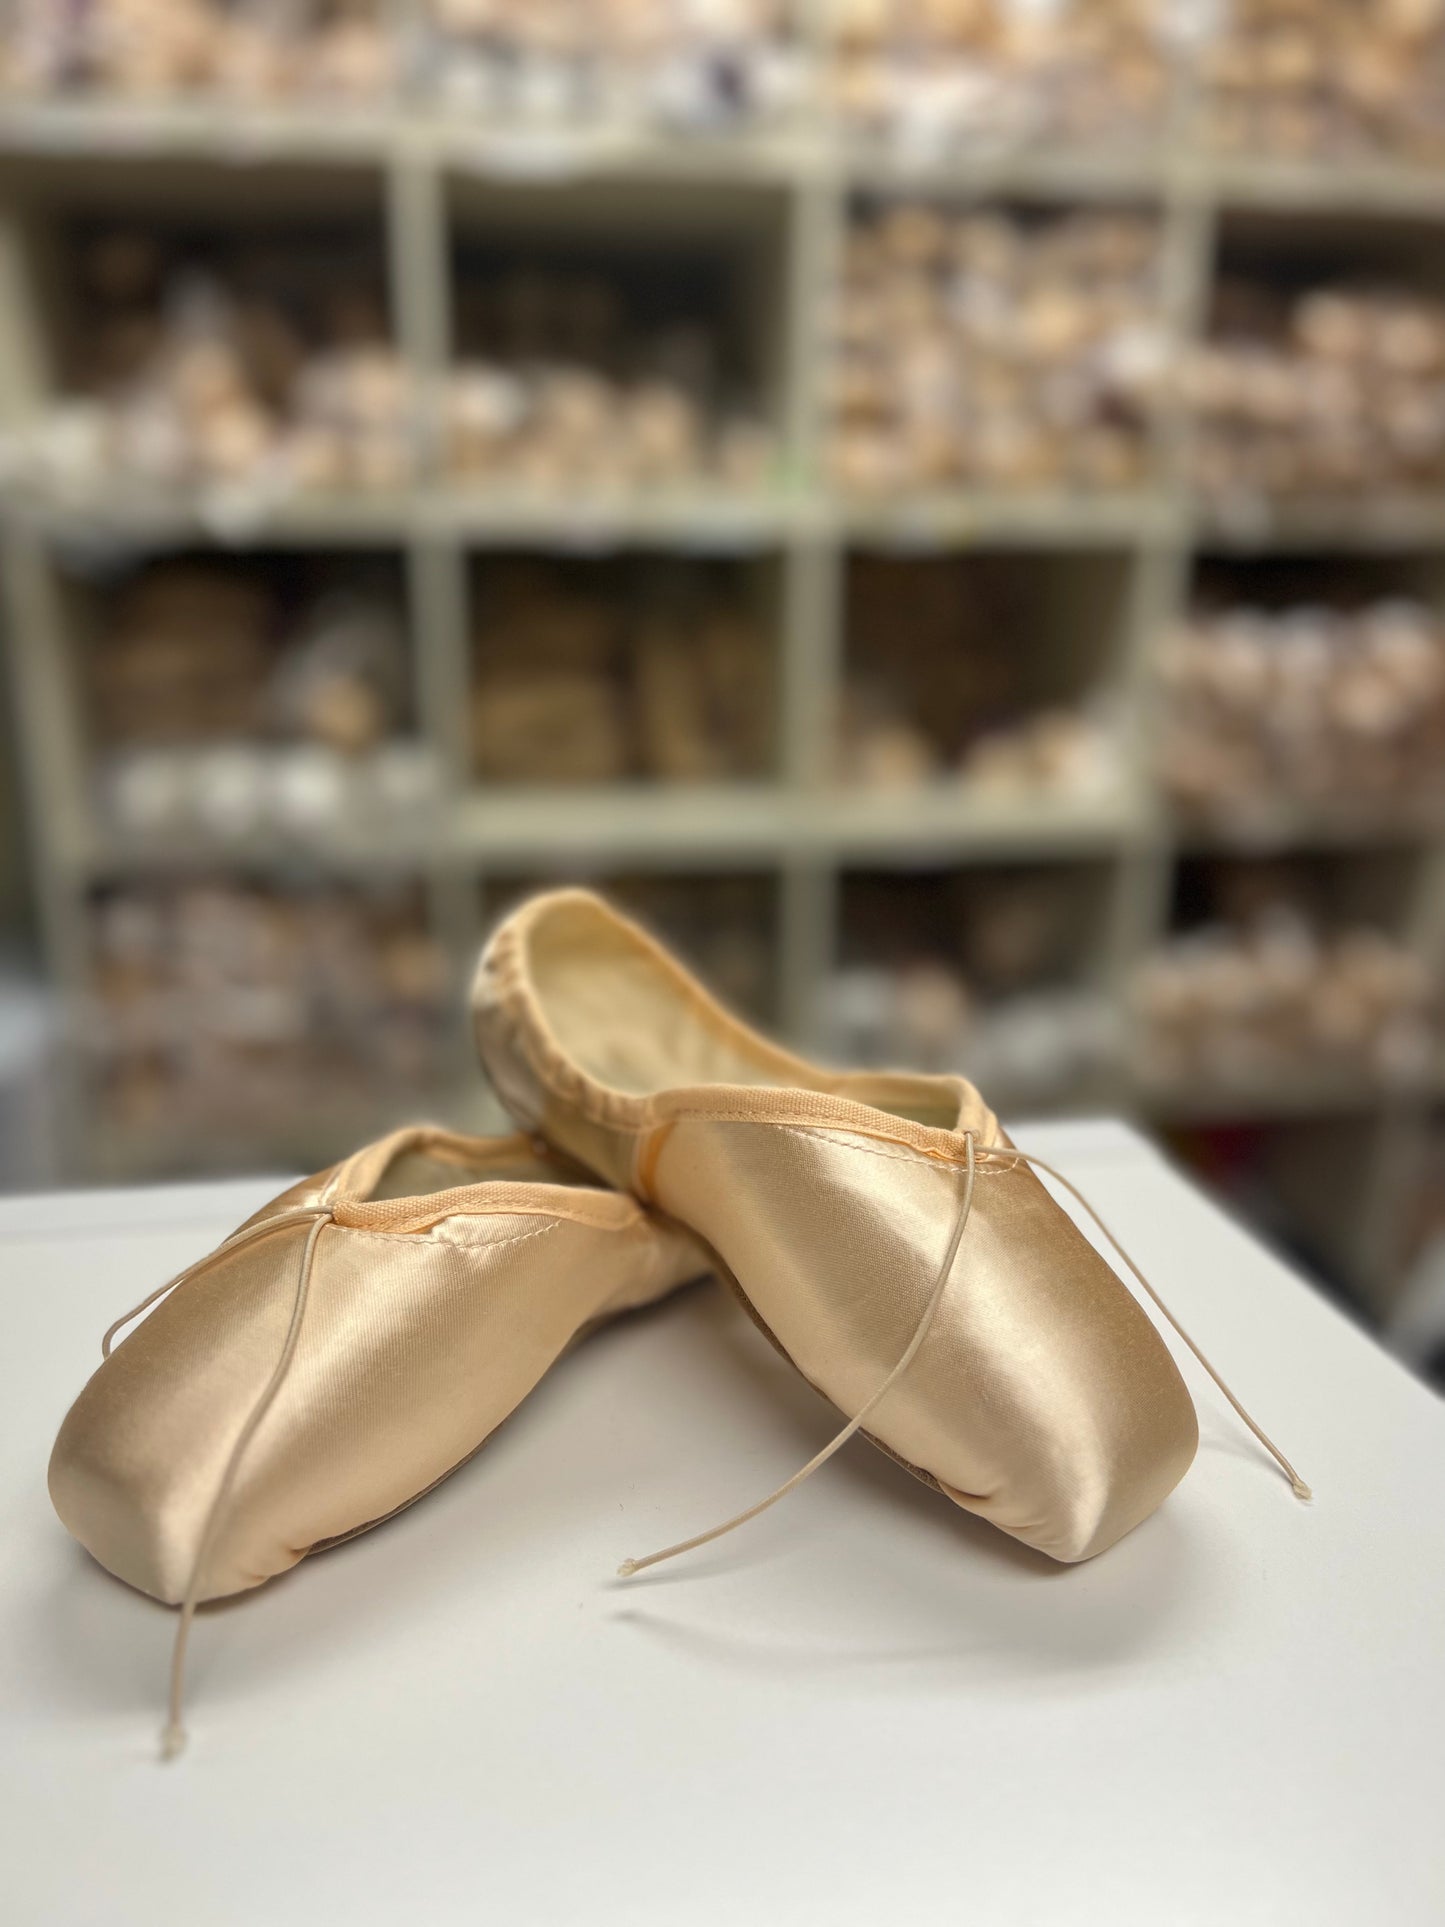 Expired Professional Pointe Shoes